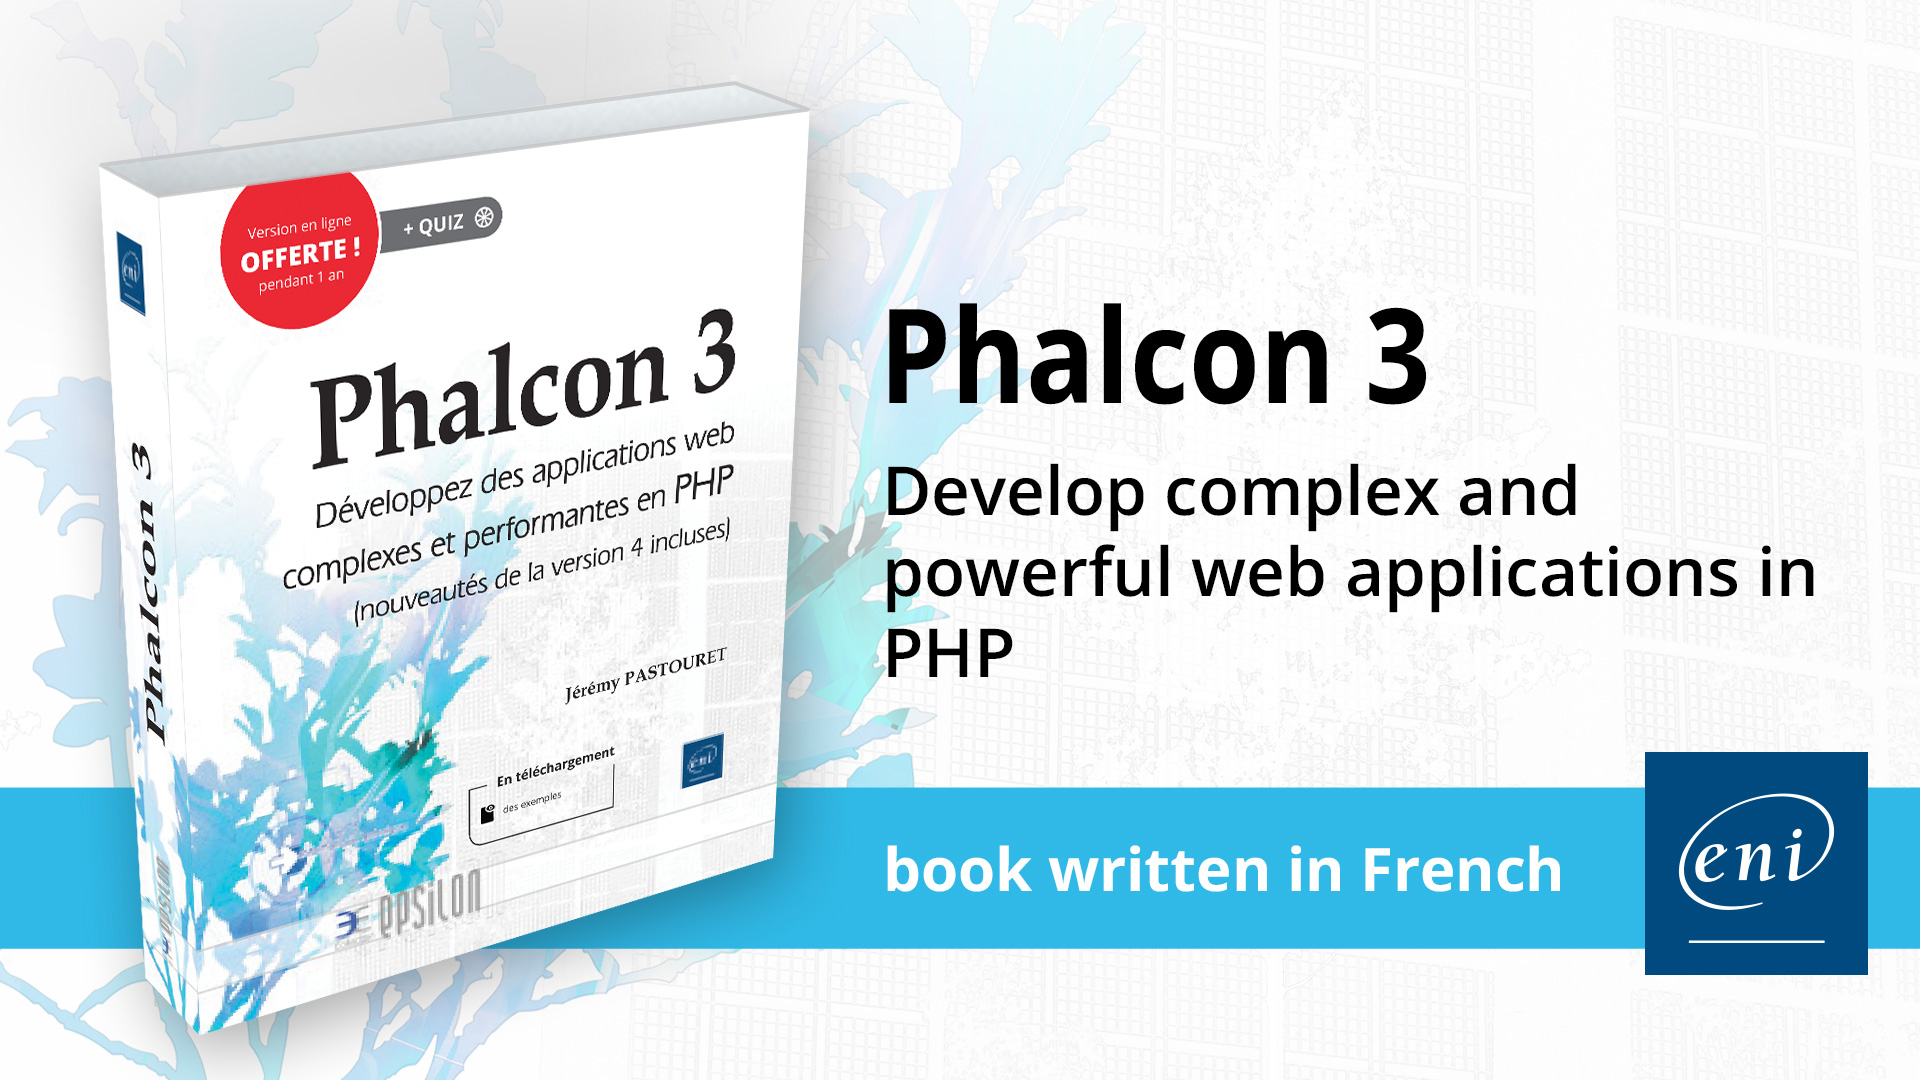 French Book for Phalcon Released